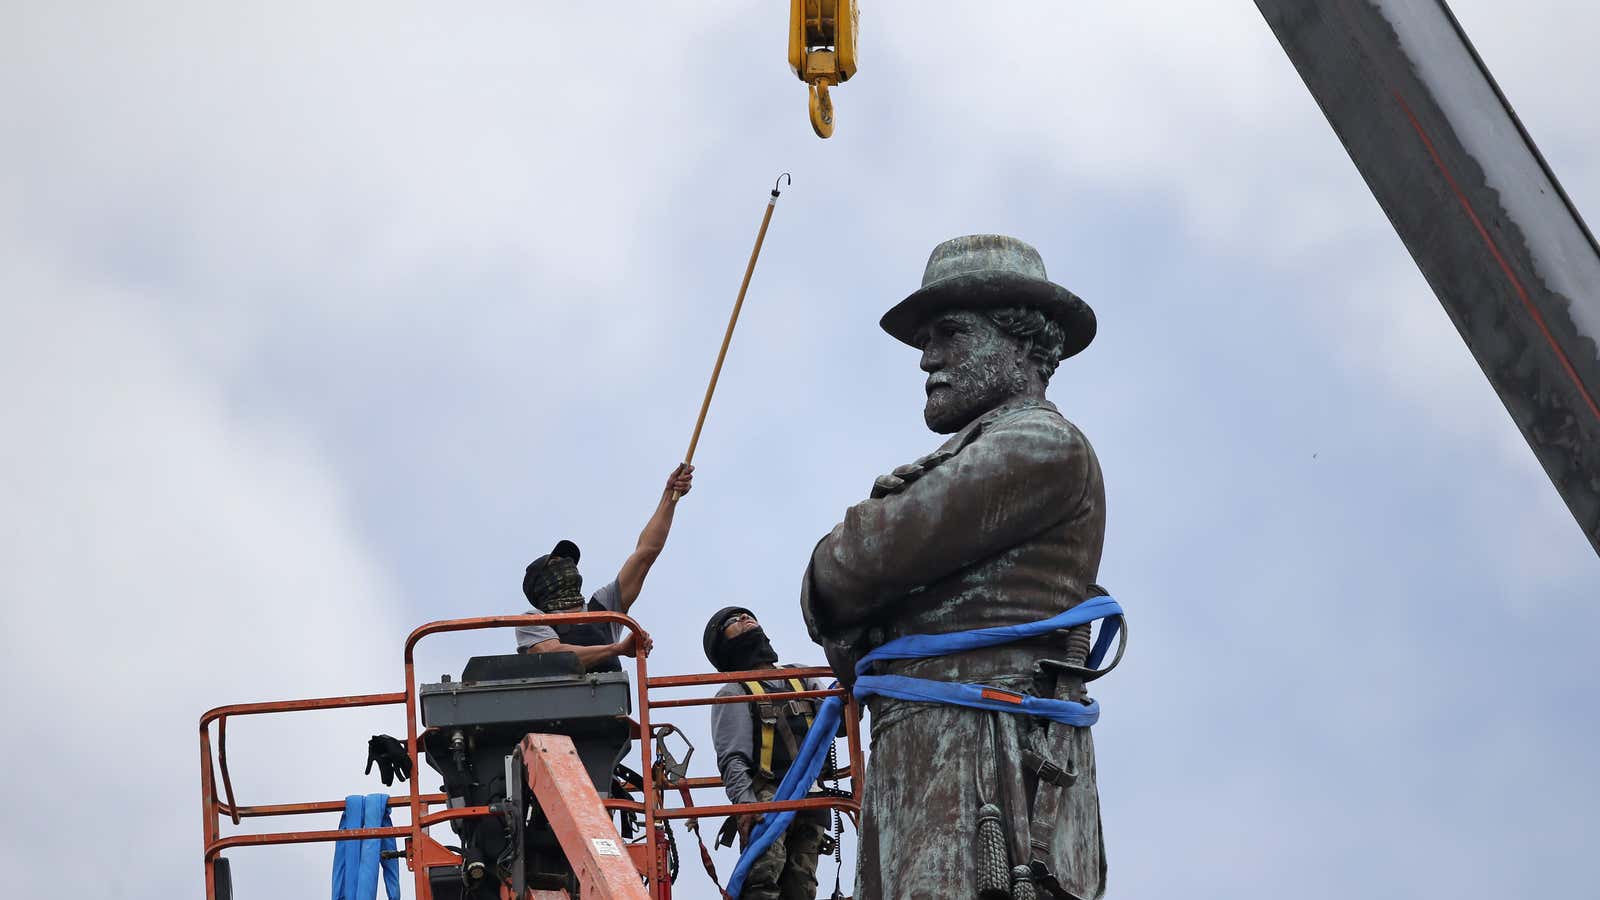 A statue of Confederate general Robert E. Lee is removed in New Orleans, Louisiana.